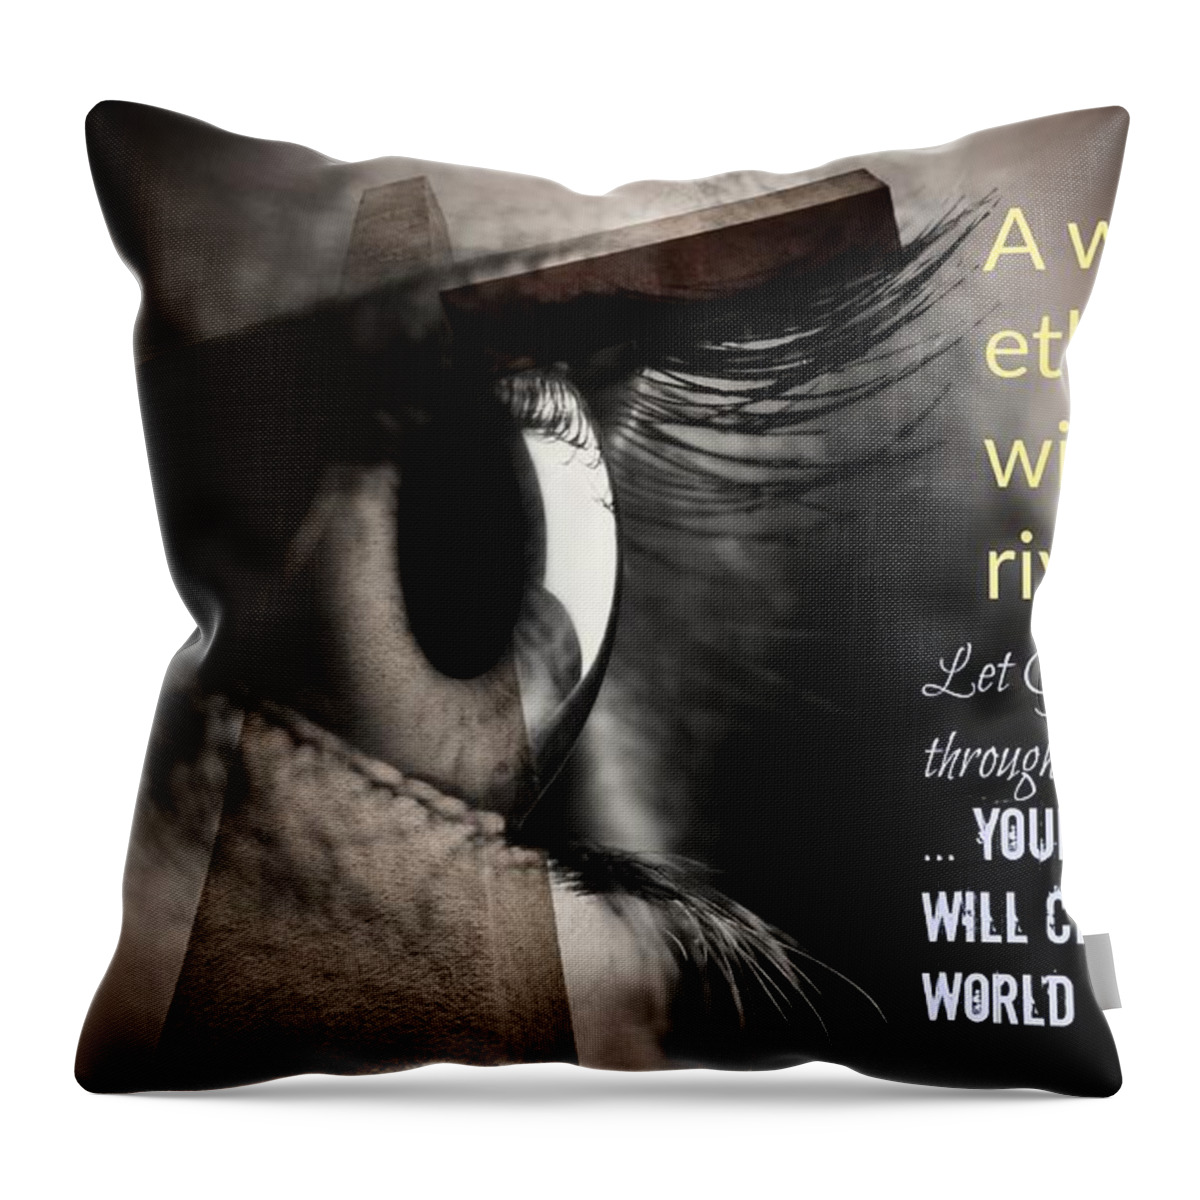  Throw Pillow featuring the photograph Uplifting267 by David Norman